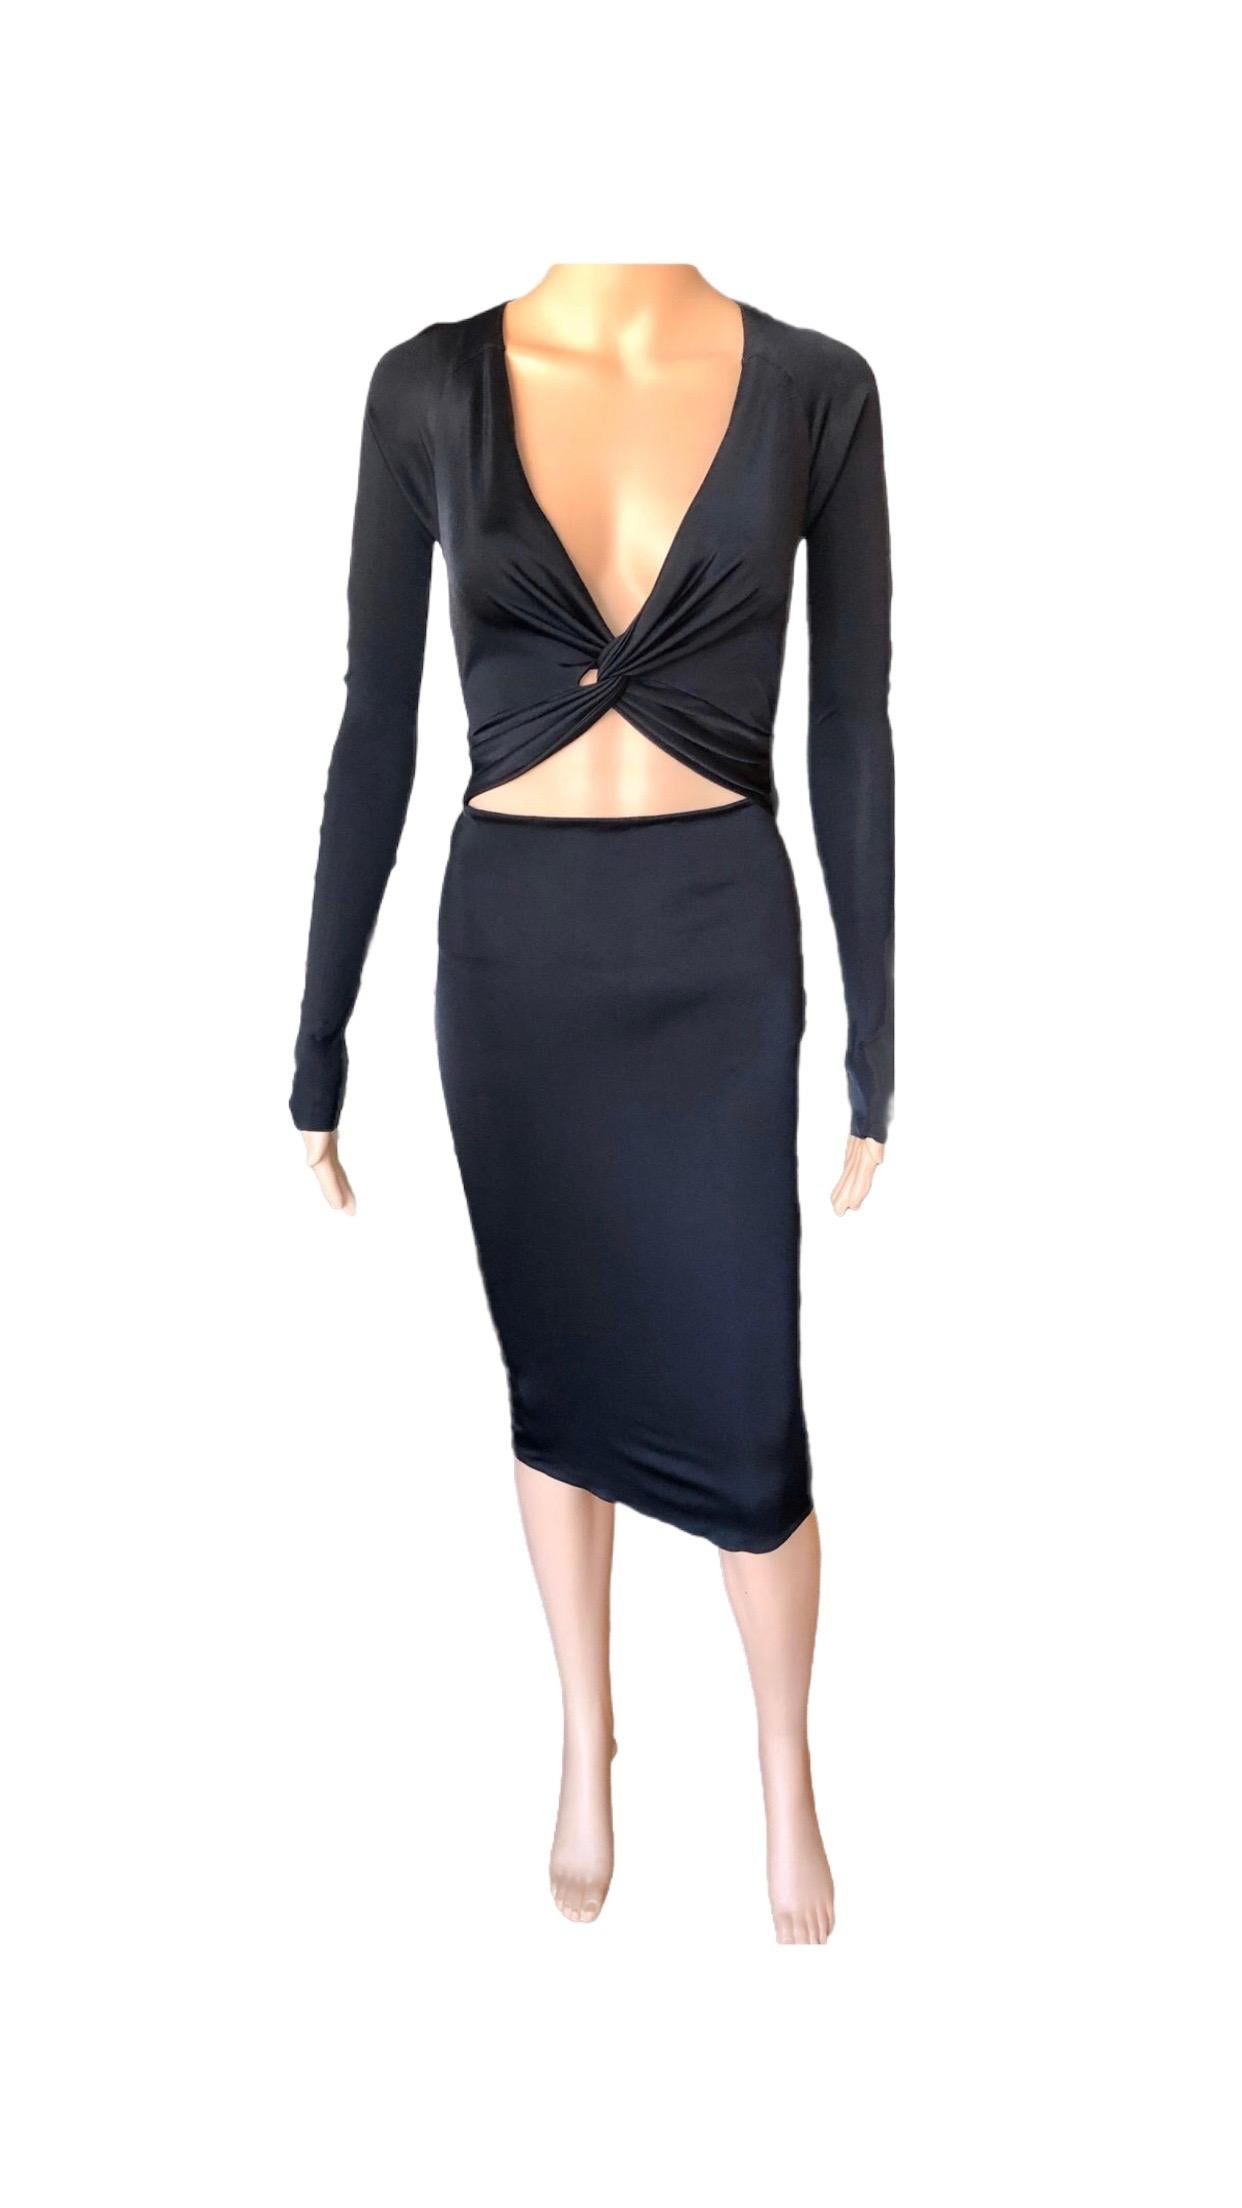 Gucci S/S 2005 Tom Ford Plunging Cutout Backless Bodycon Black Dress For Sale 10